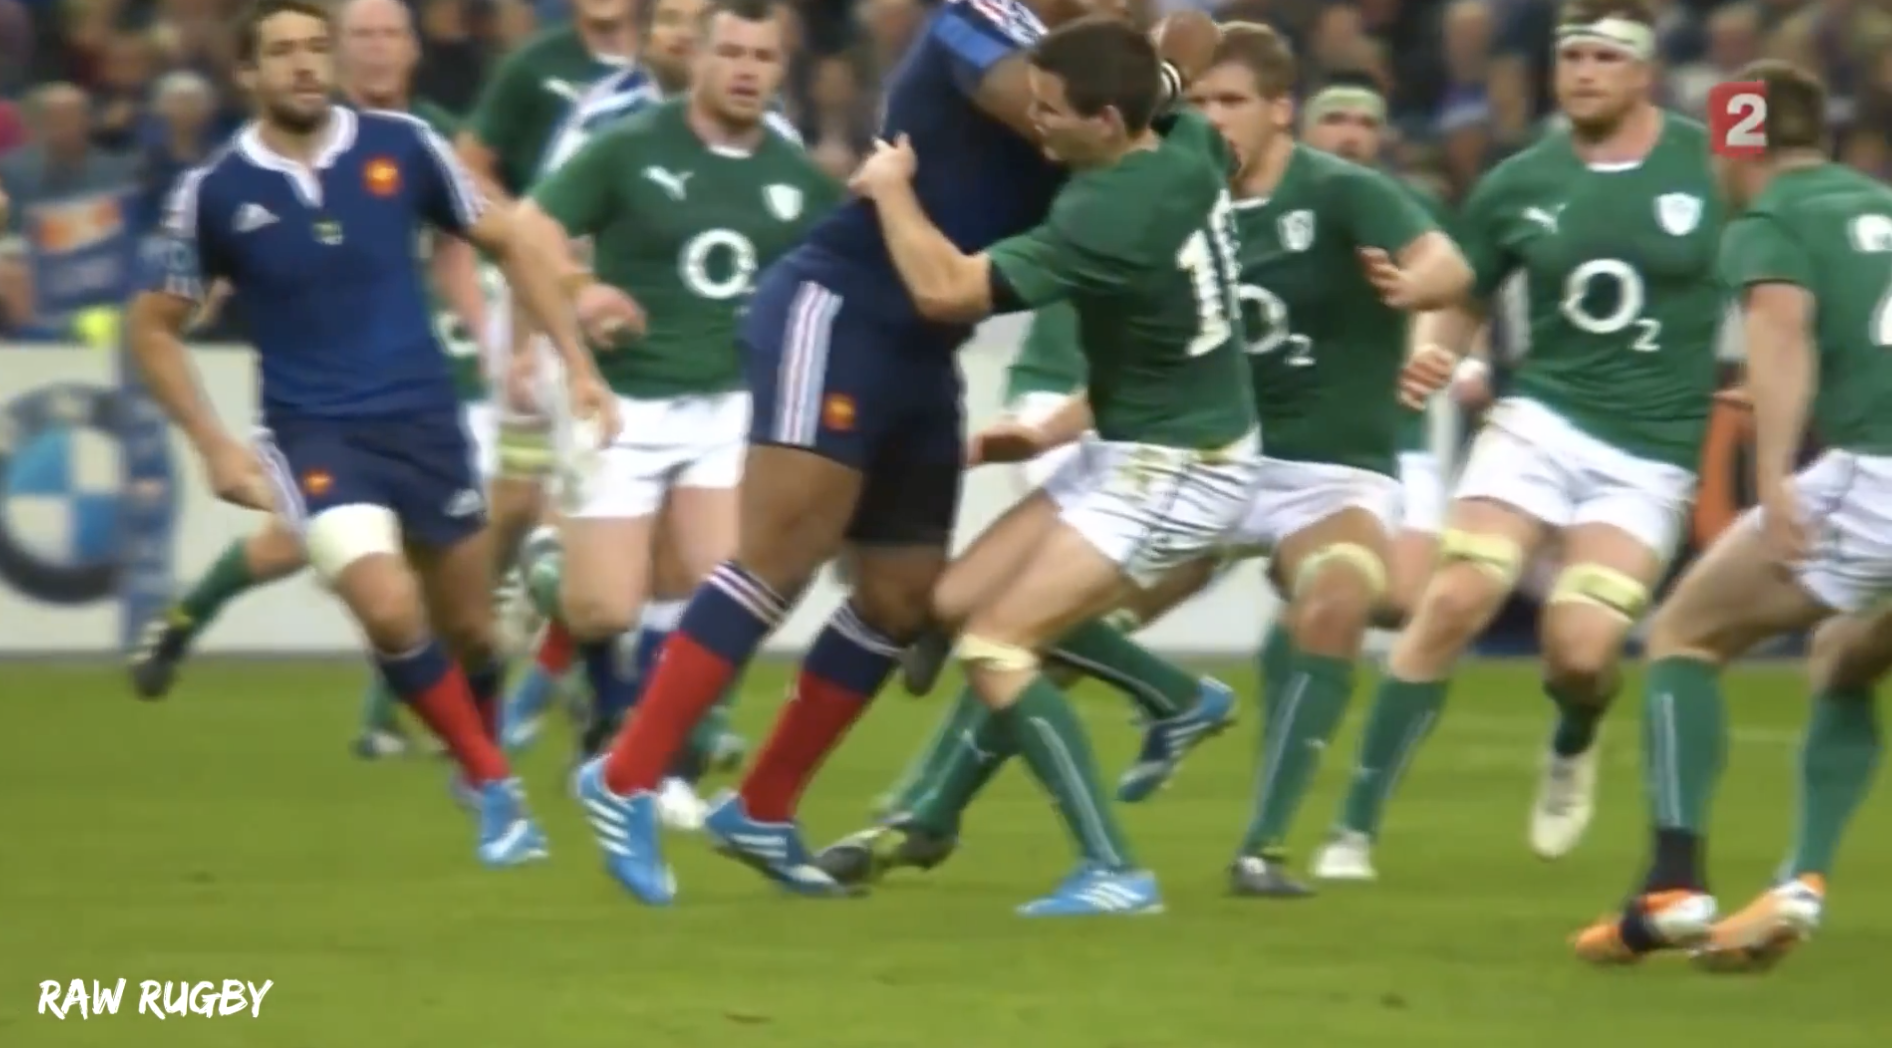 RAW RUGBY: New conclusive evidence that Johnny Sexton is Ireland's rugby messiah